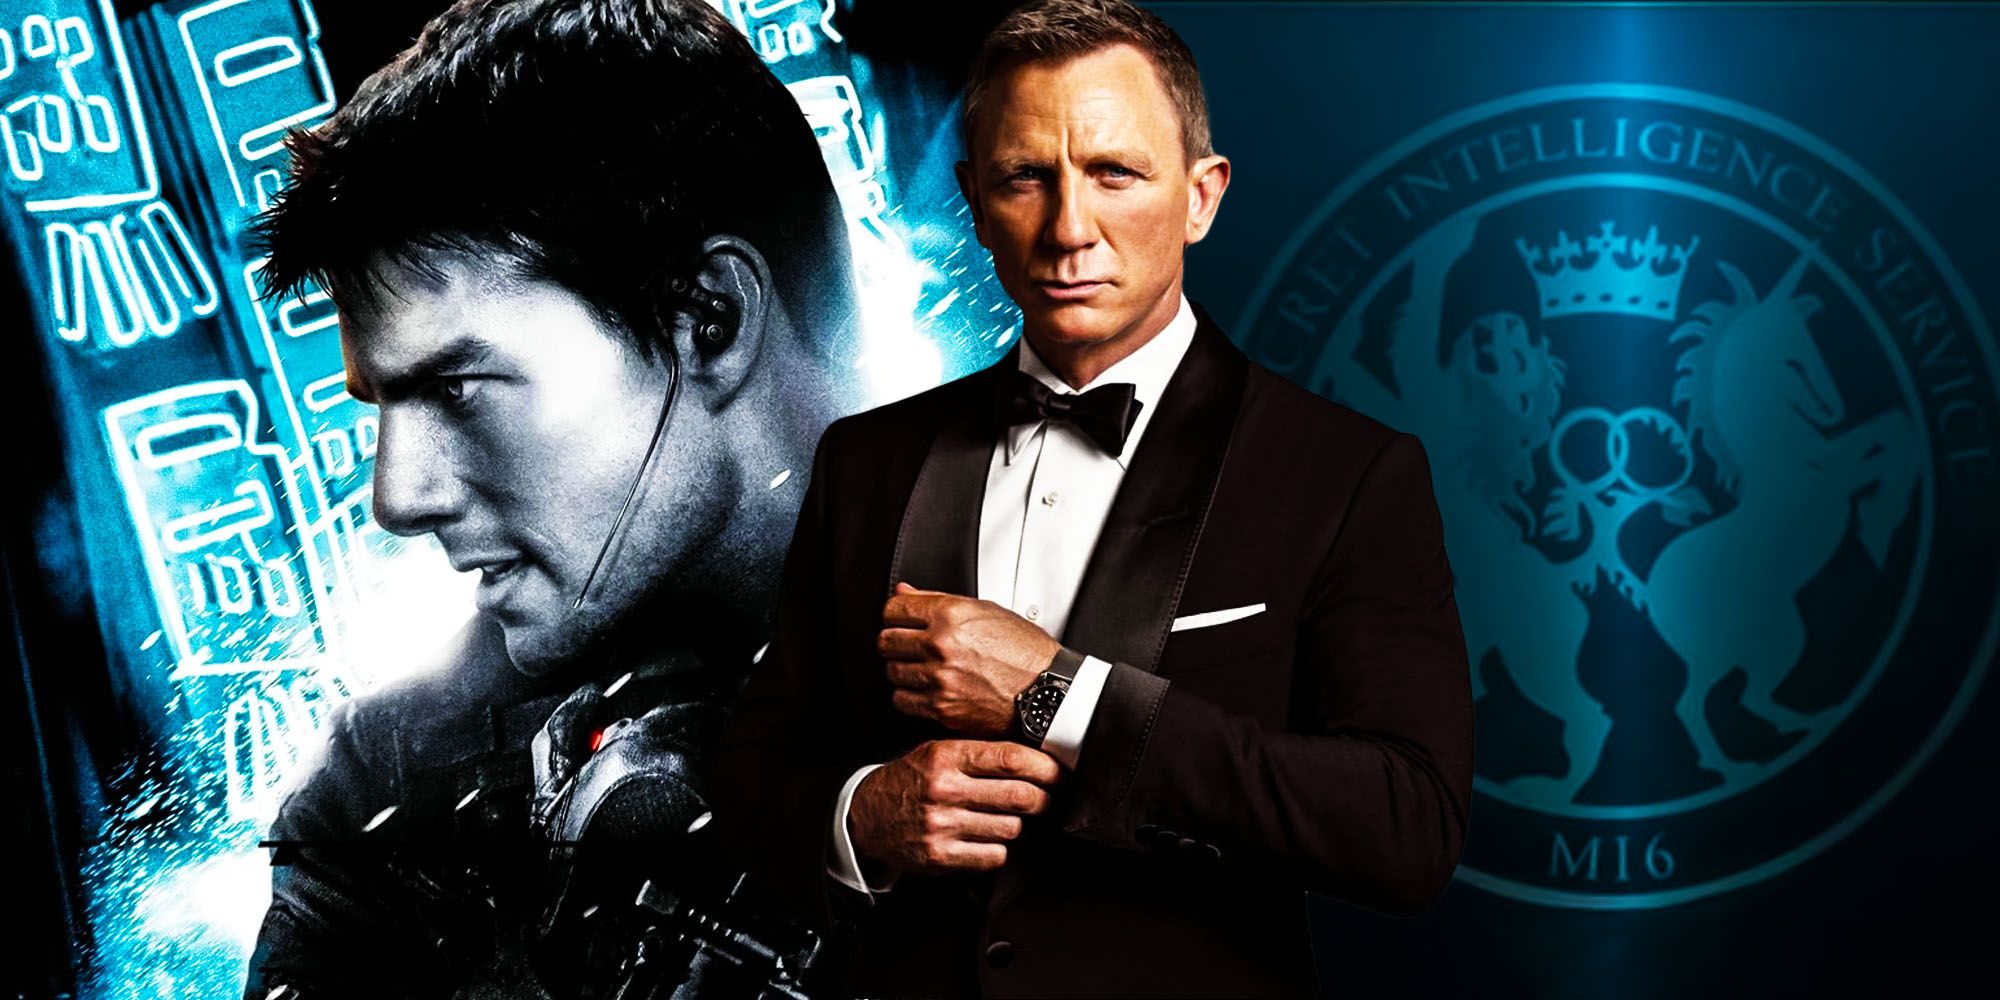 Mission impossible movie titles changed because of James bond MI6